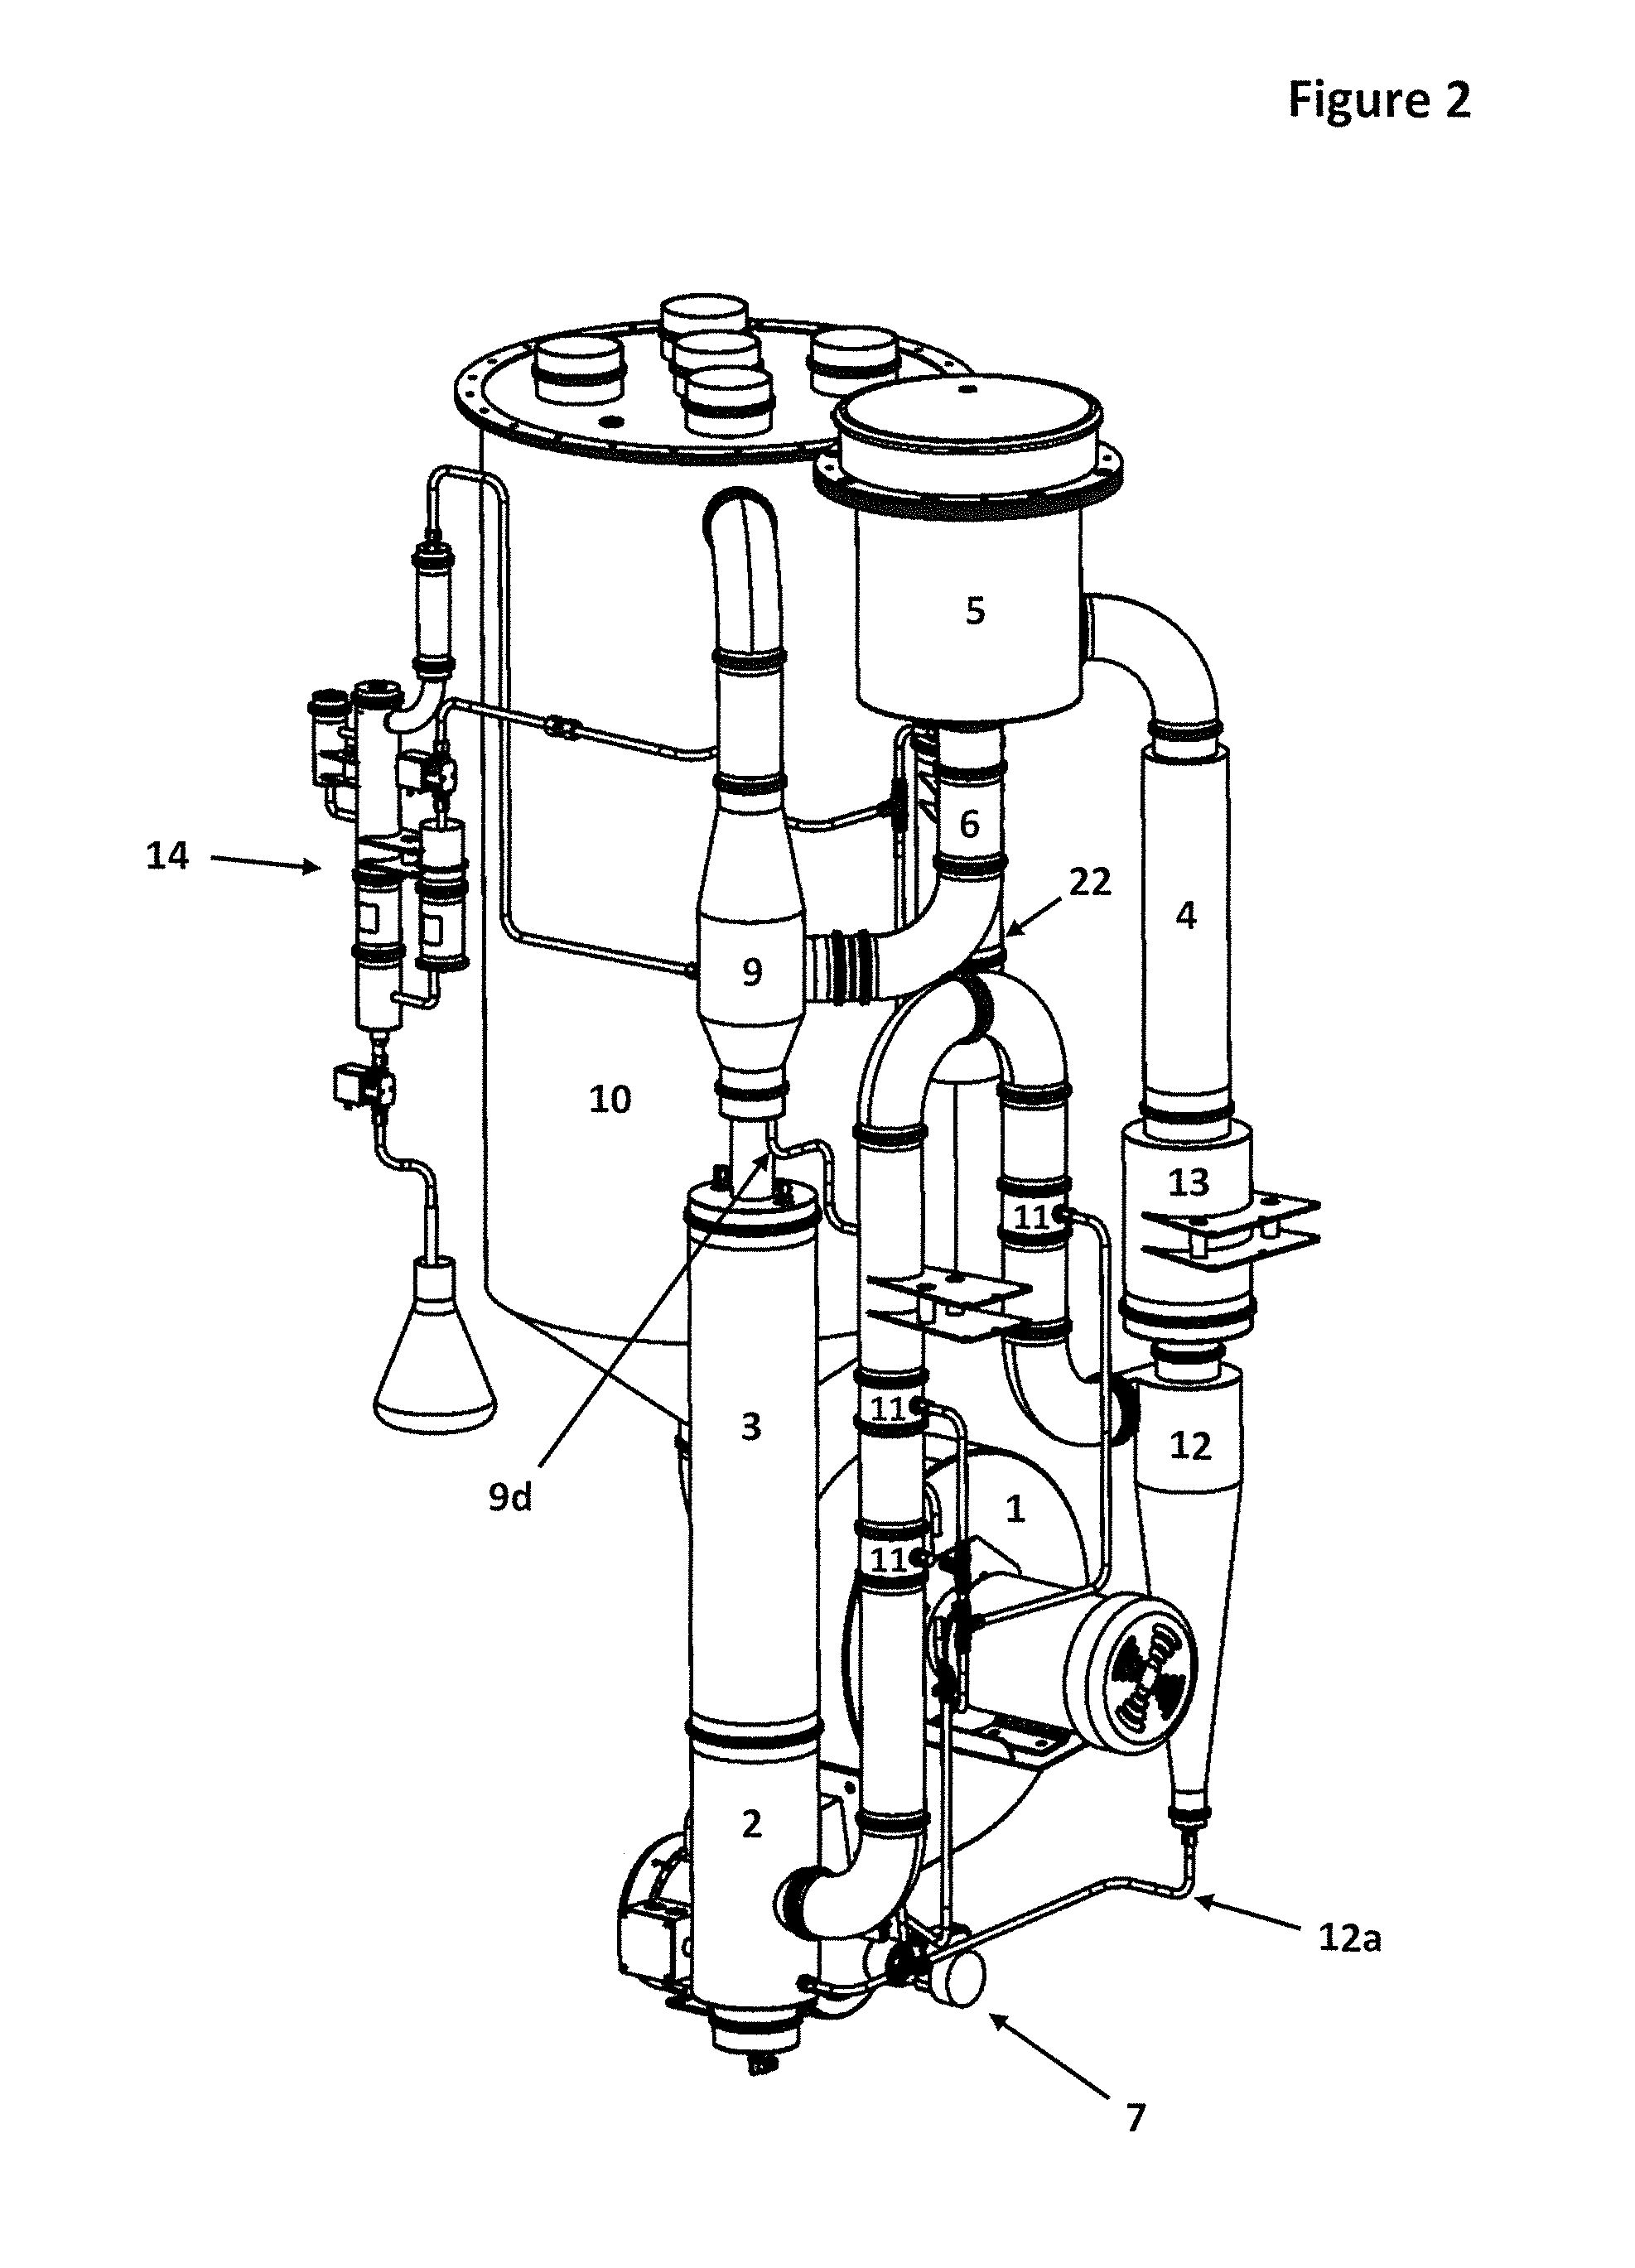 Method and apparatus for extracting botanical oils